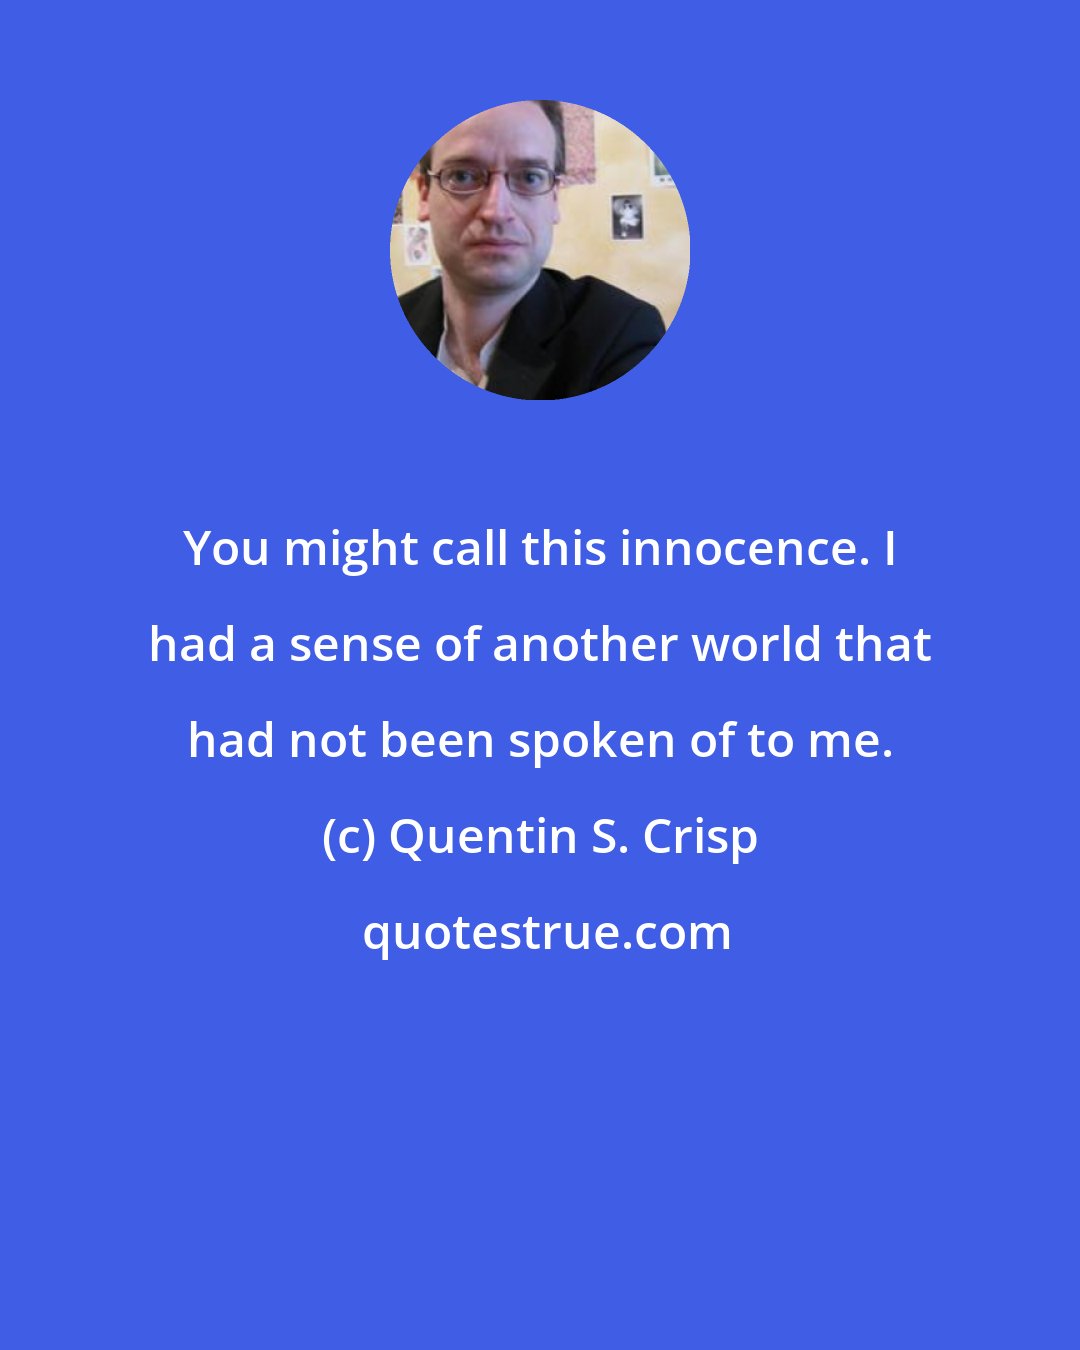 Quentin S. Crisp: You might call this innocence. I had a sense of another world that had not been spoken of to me.